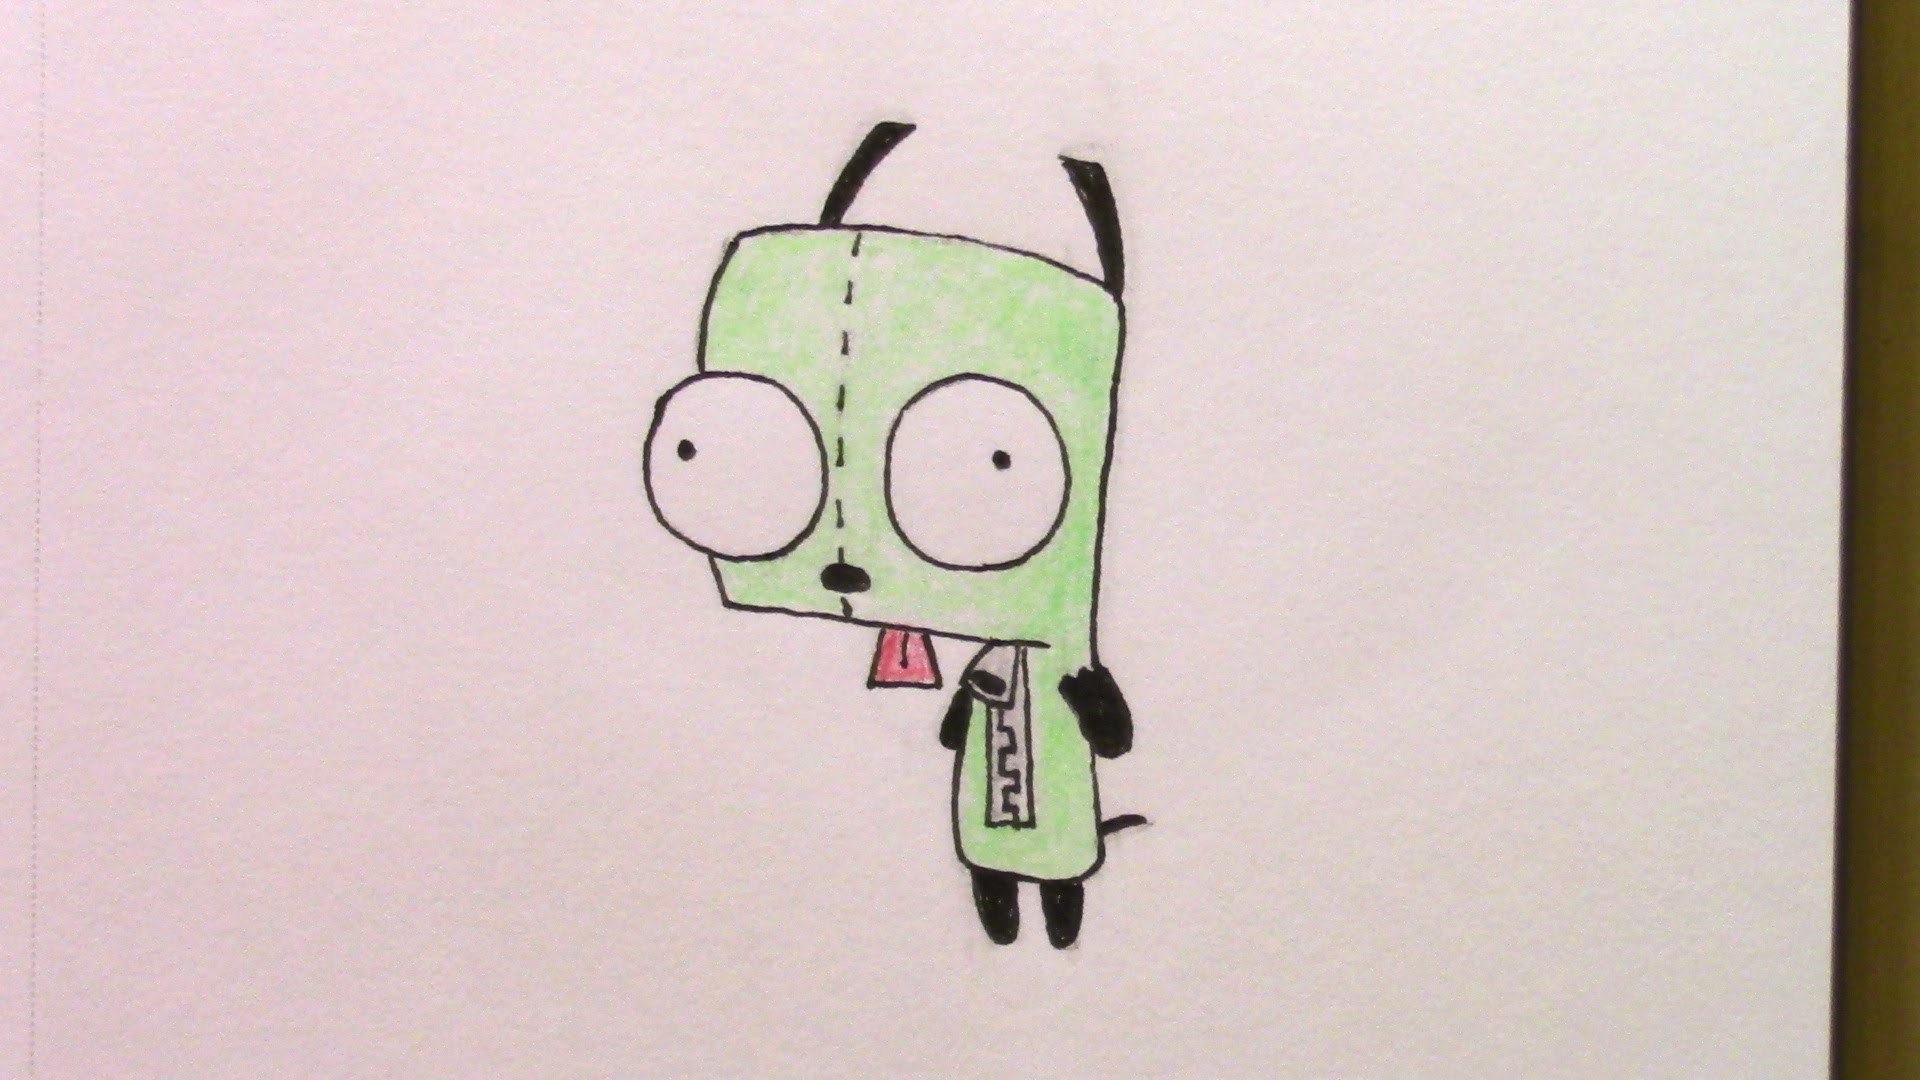 1920x1080 388 - How to Draw Dog Gir from Invader Zim